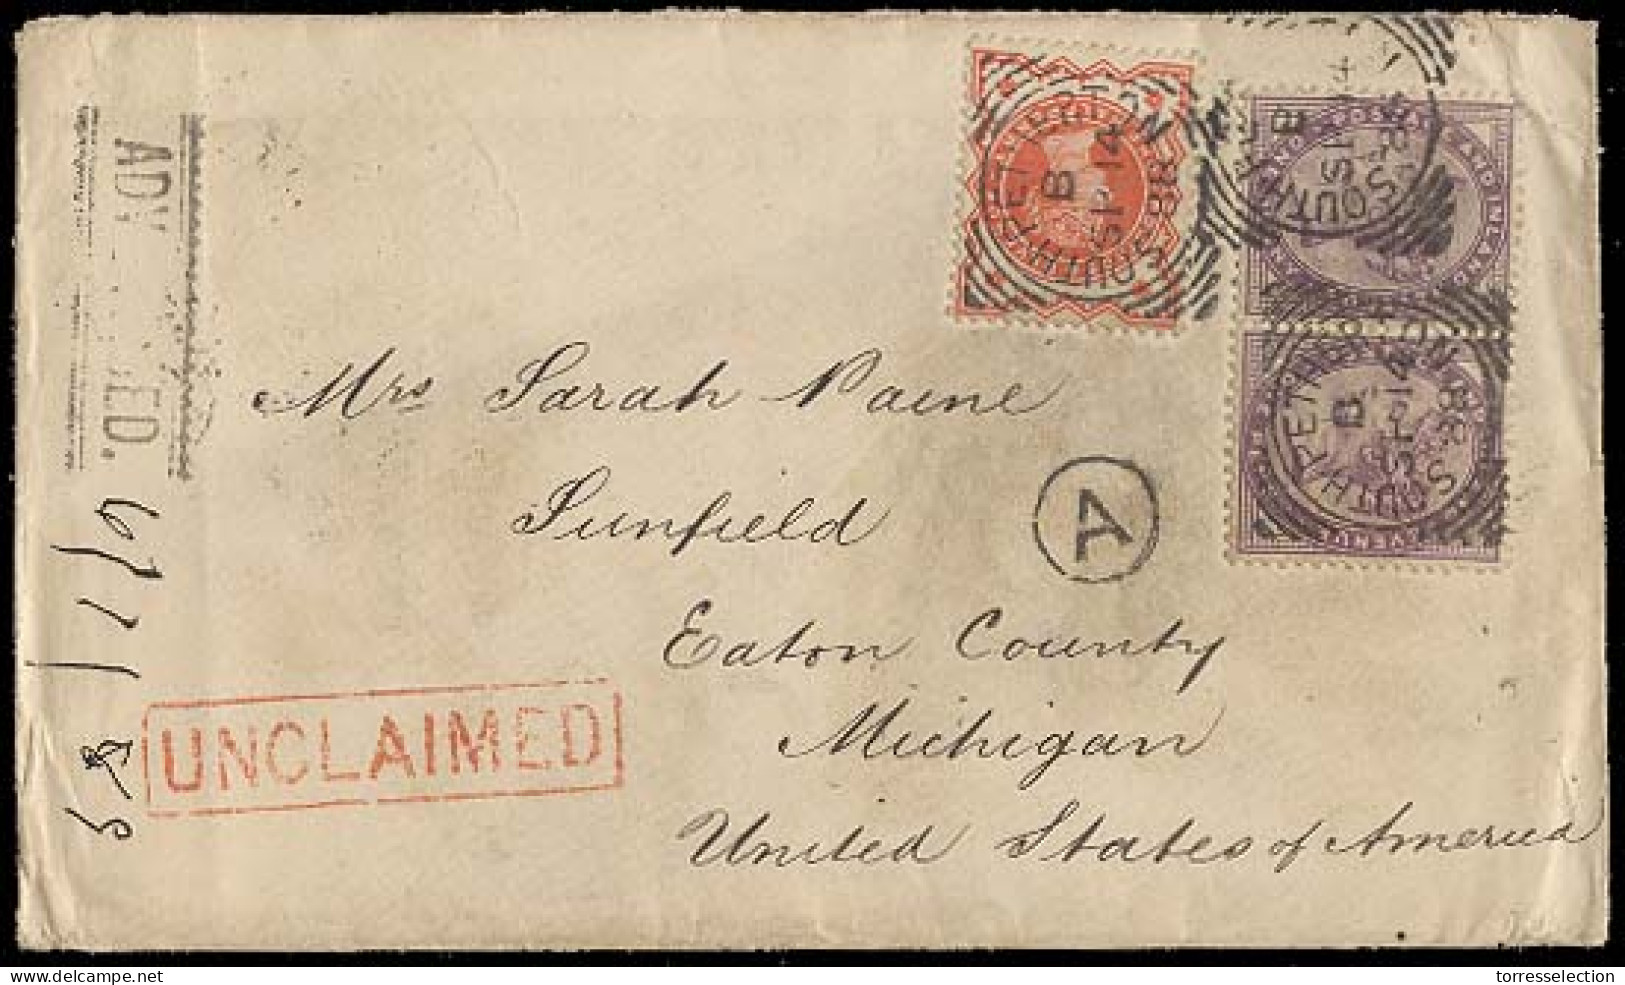 GREAT BRITAIN. 1888. South Petherton - USA. Sunfield - Michigan. Multifkd + "A" + Unclaimed. Lovely. - ...-1840 Prephilately